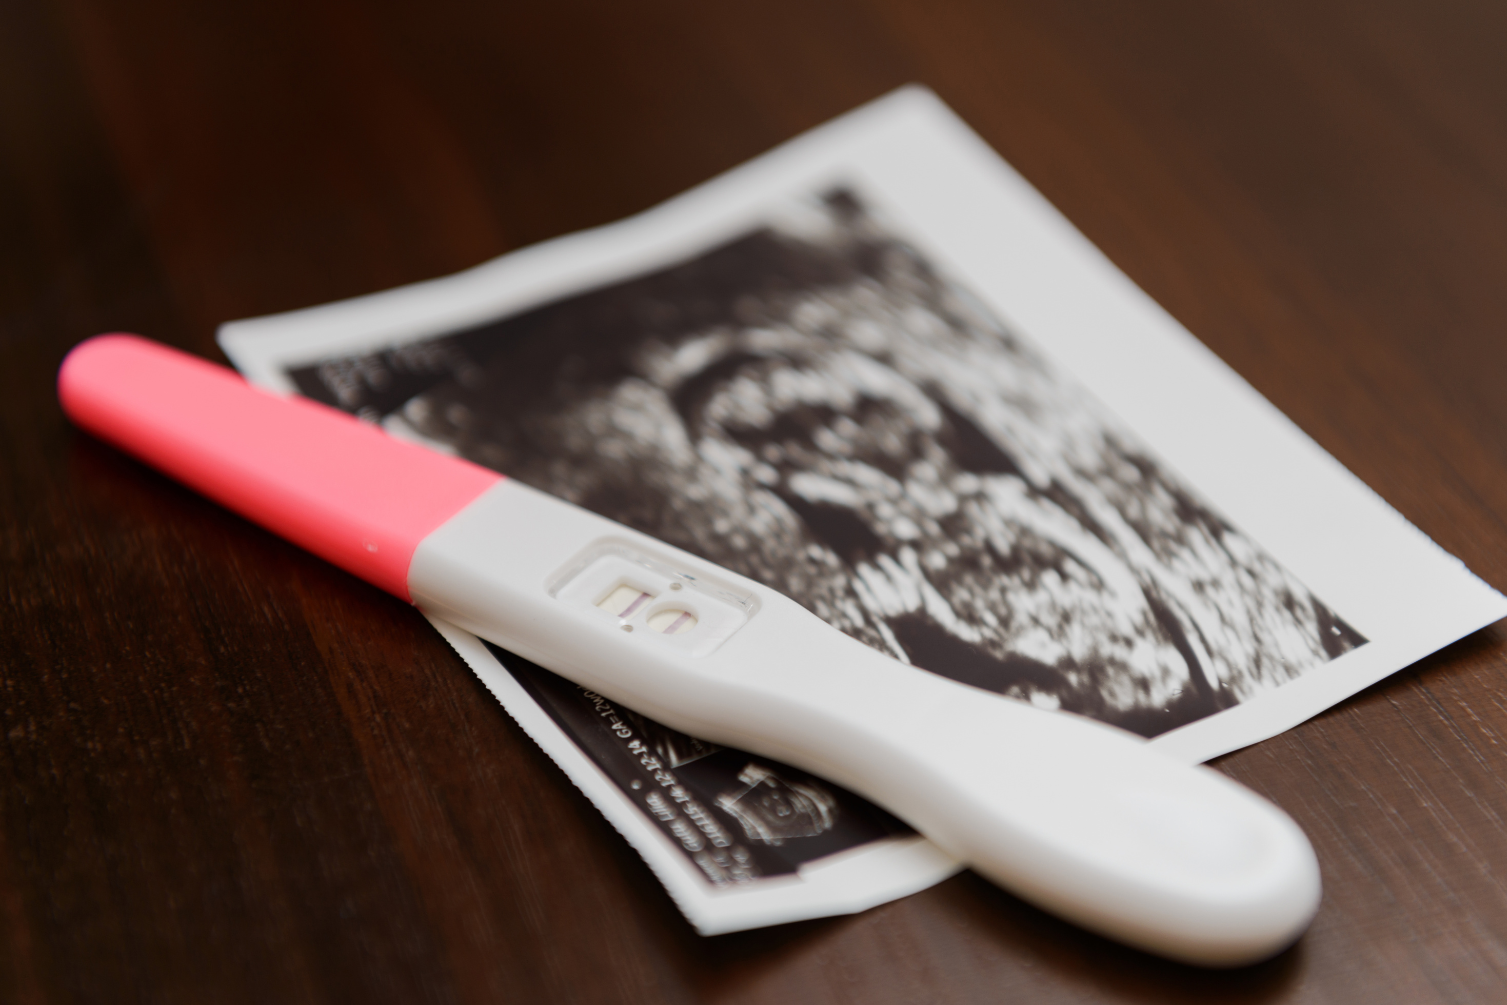 When is it safe to announce an IVF pregnancy? It depends on a few factors. Learn more and find IVF pregnancy announcement ideas in this blog post!